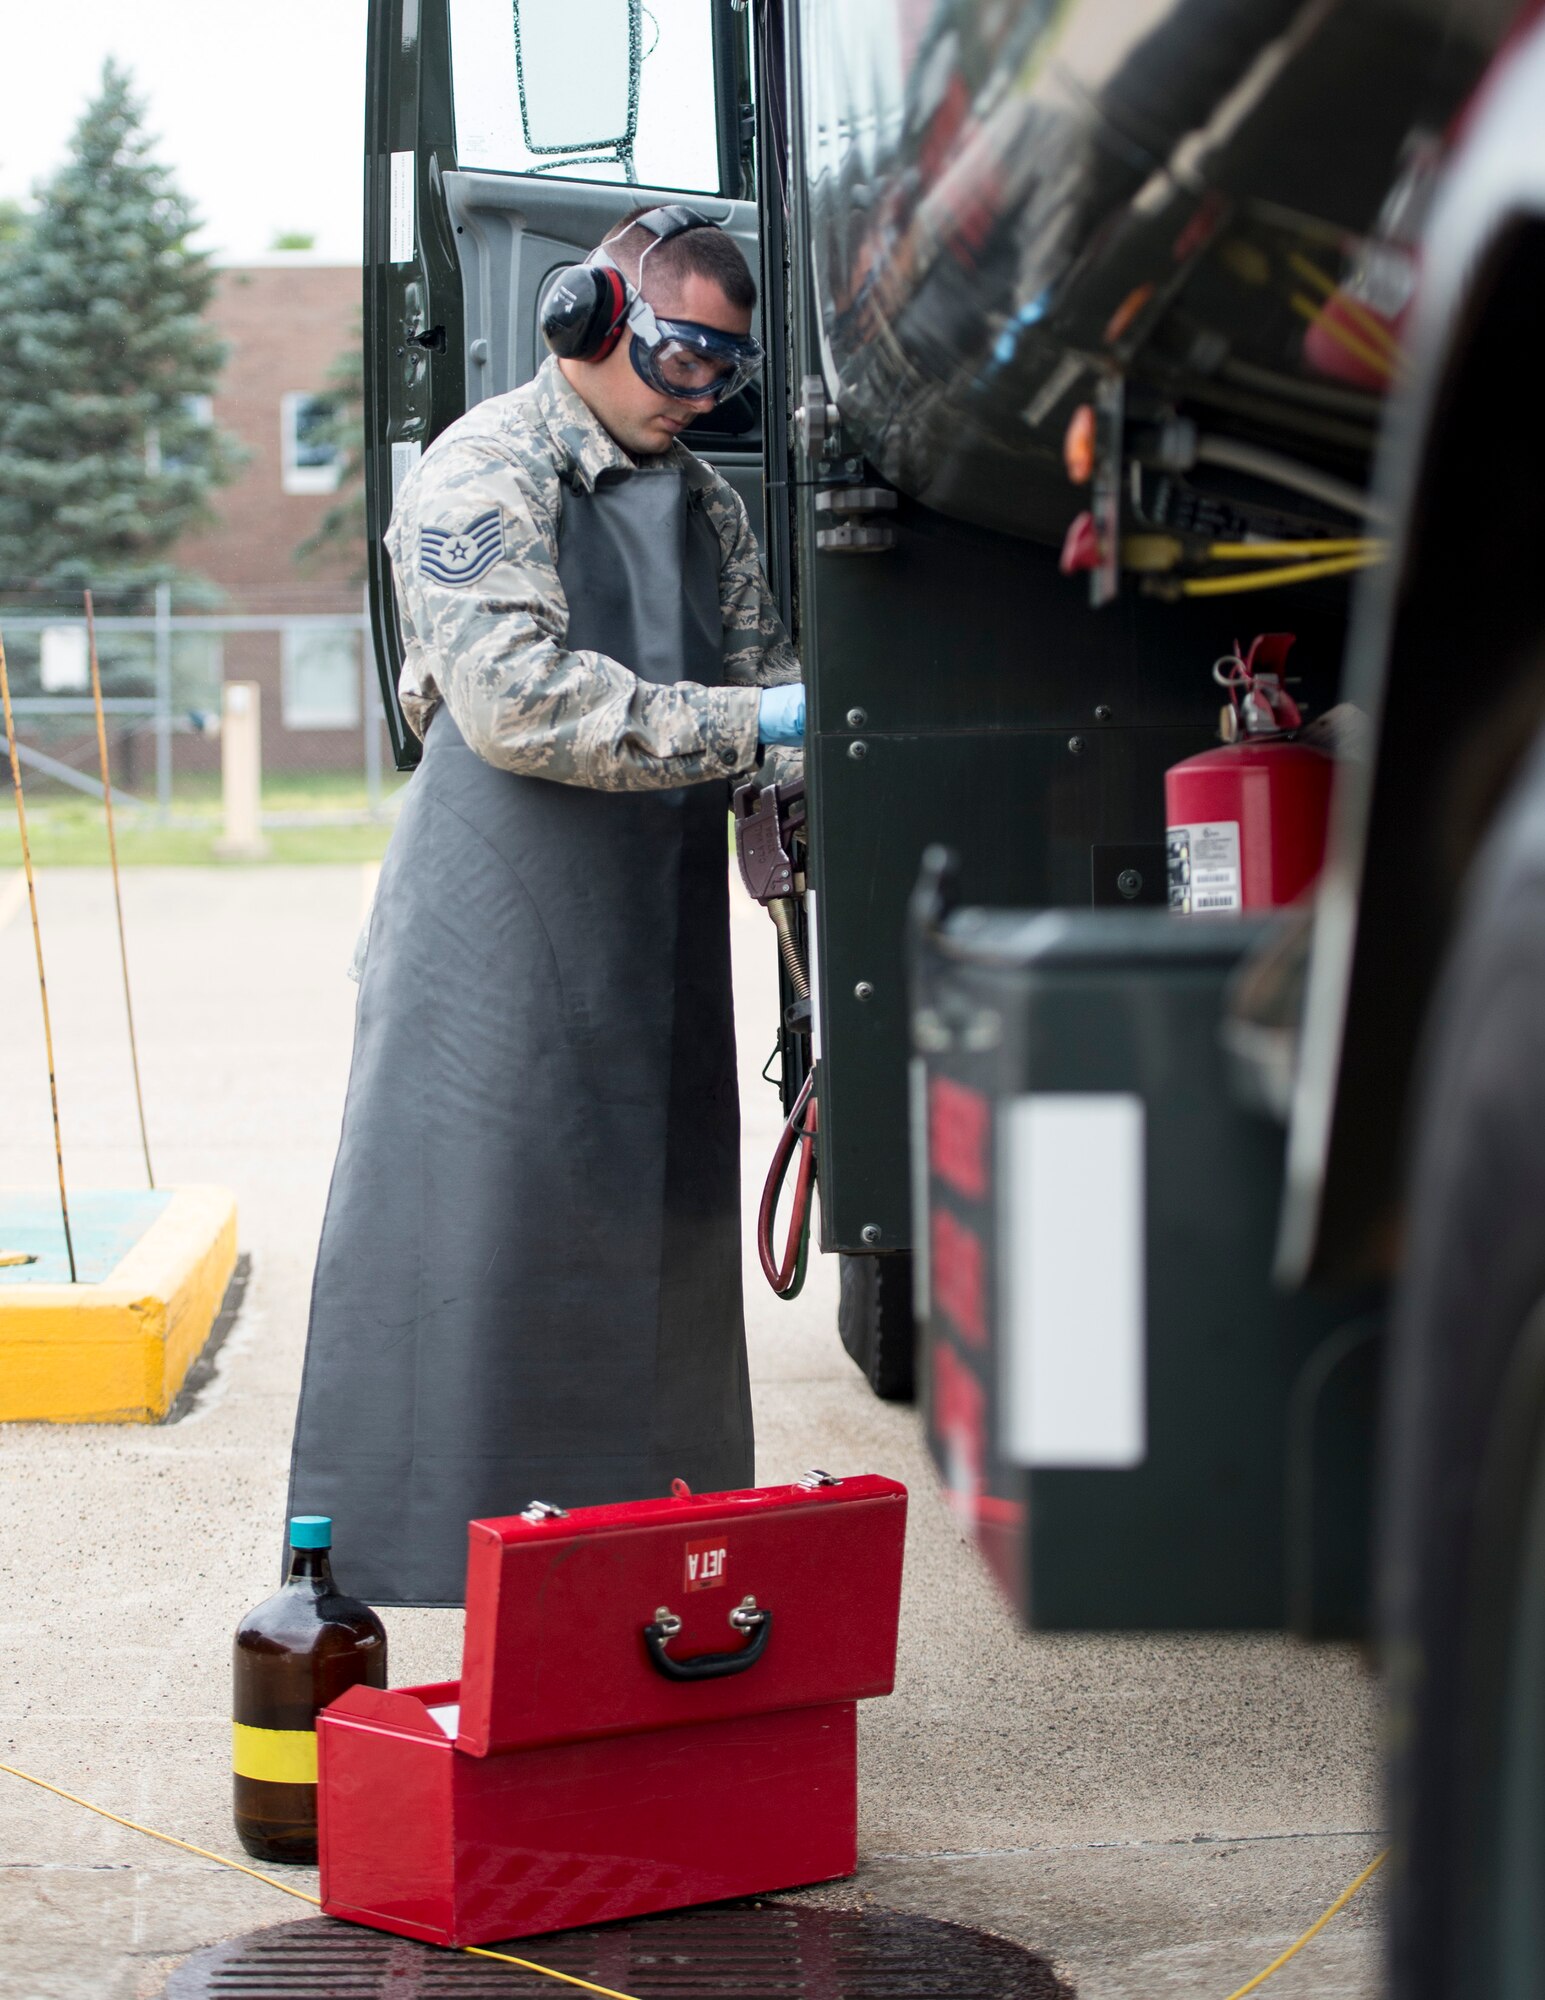 U.S. Air Force Tech. Sgt. Dustin Legatt, a fuels specialist with the 133rd Petroleum, Oil and Lubricants Flight, draws a fuel sample for a quality control test in St. Paul, Minn., July 10, 2019.